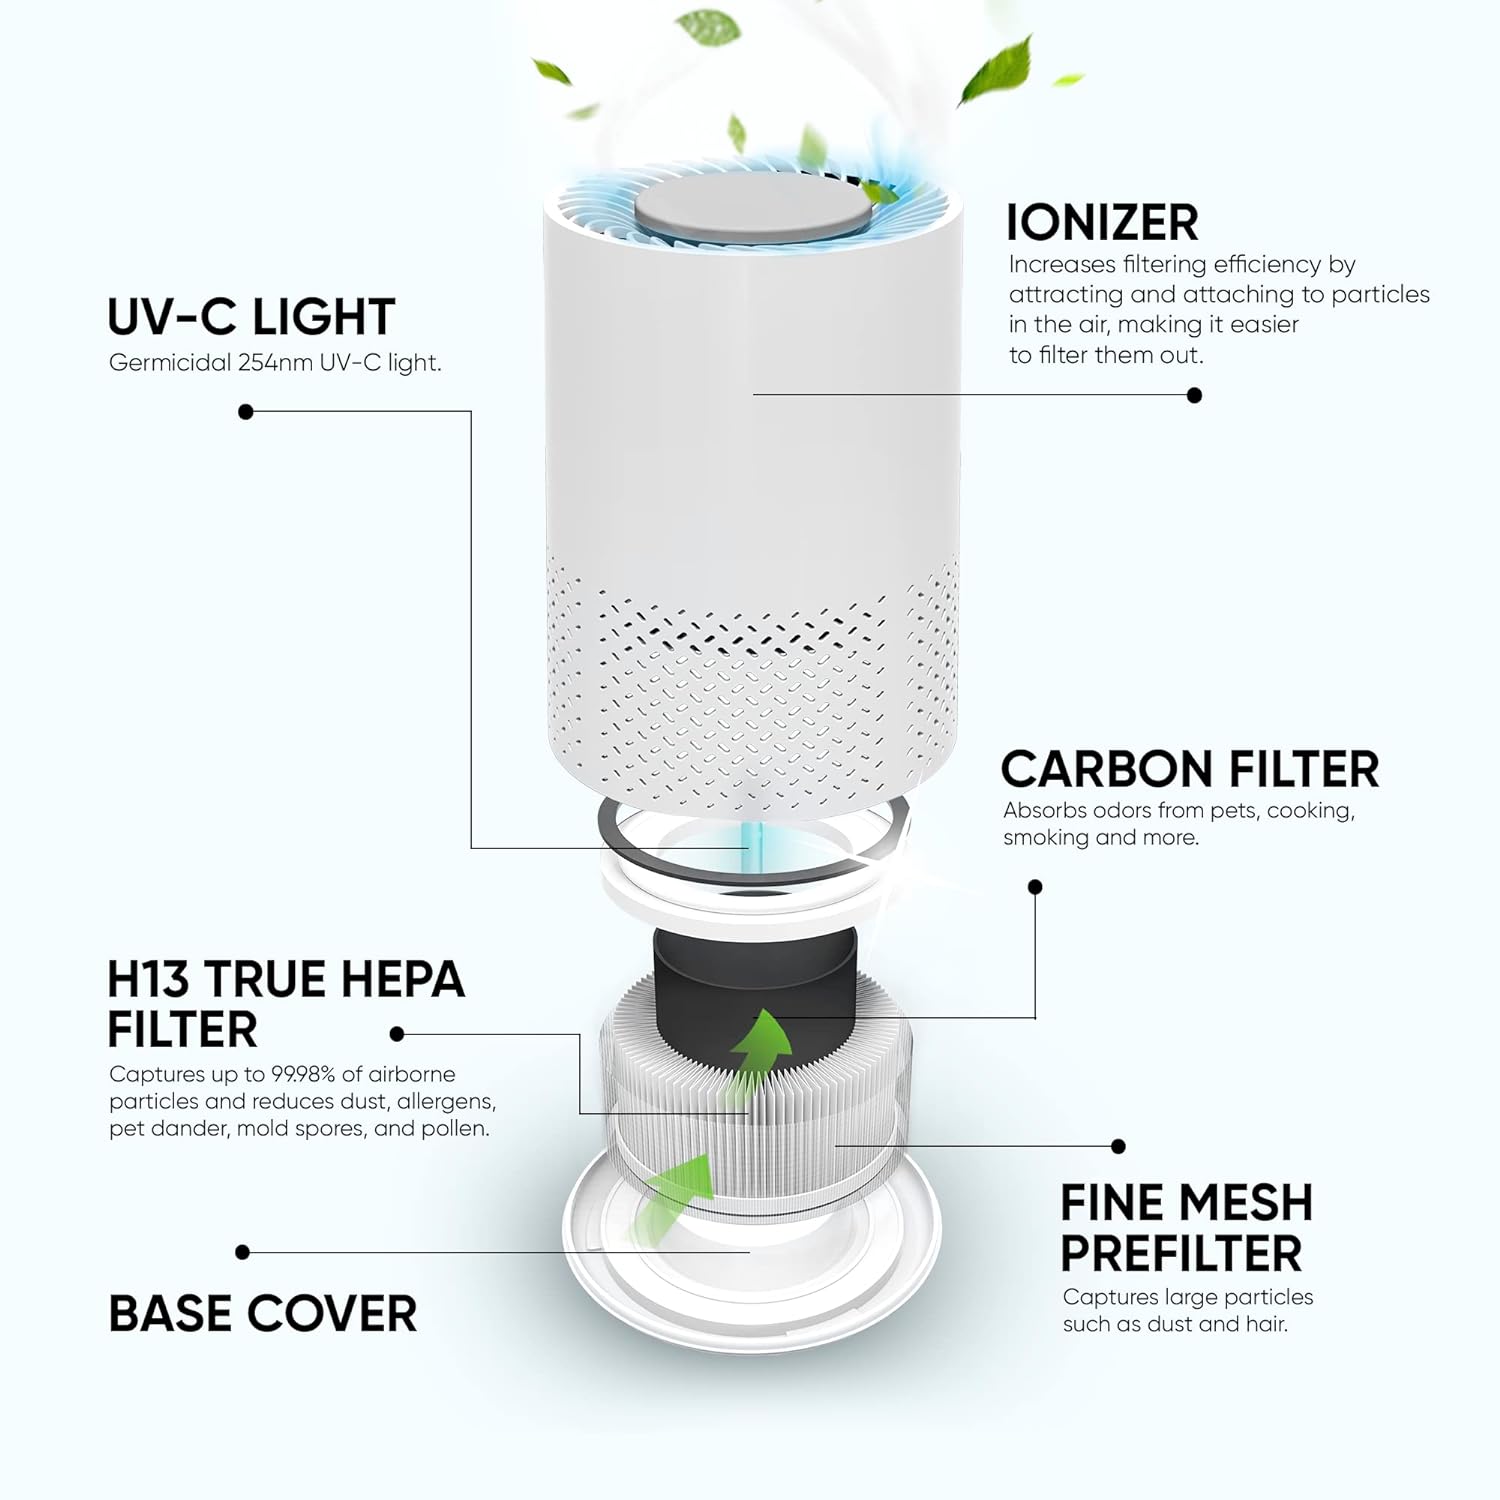 InvisiClean Stella HEPA Filter Air Purifier - Portable Desktop Air Purifier for Home - Odor Eliminating & Allergy Air Purifier for Baby Room & Bedroom with UV light + Negative Ion Generator/Ionizer